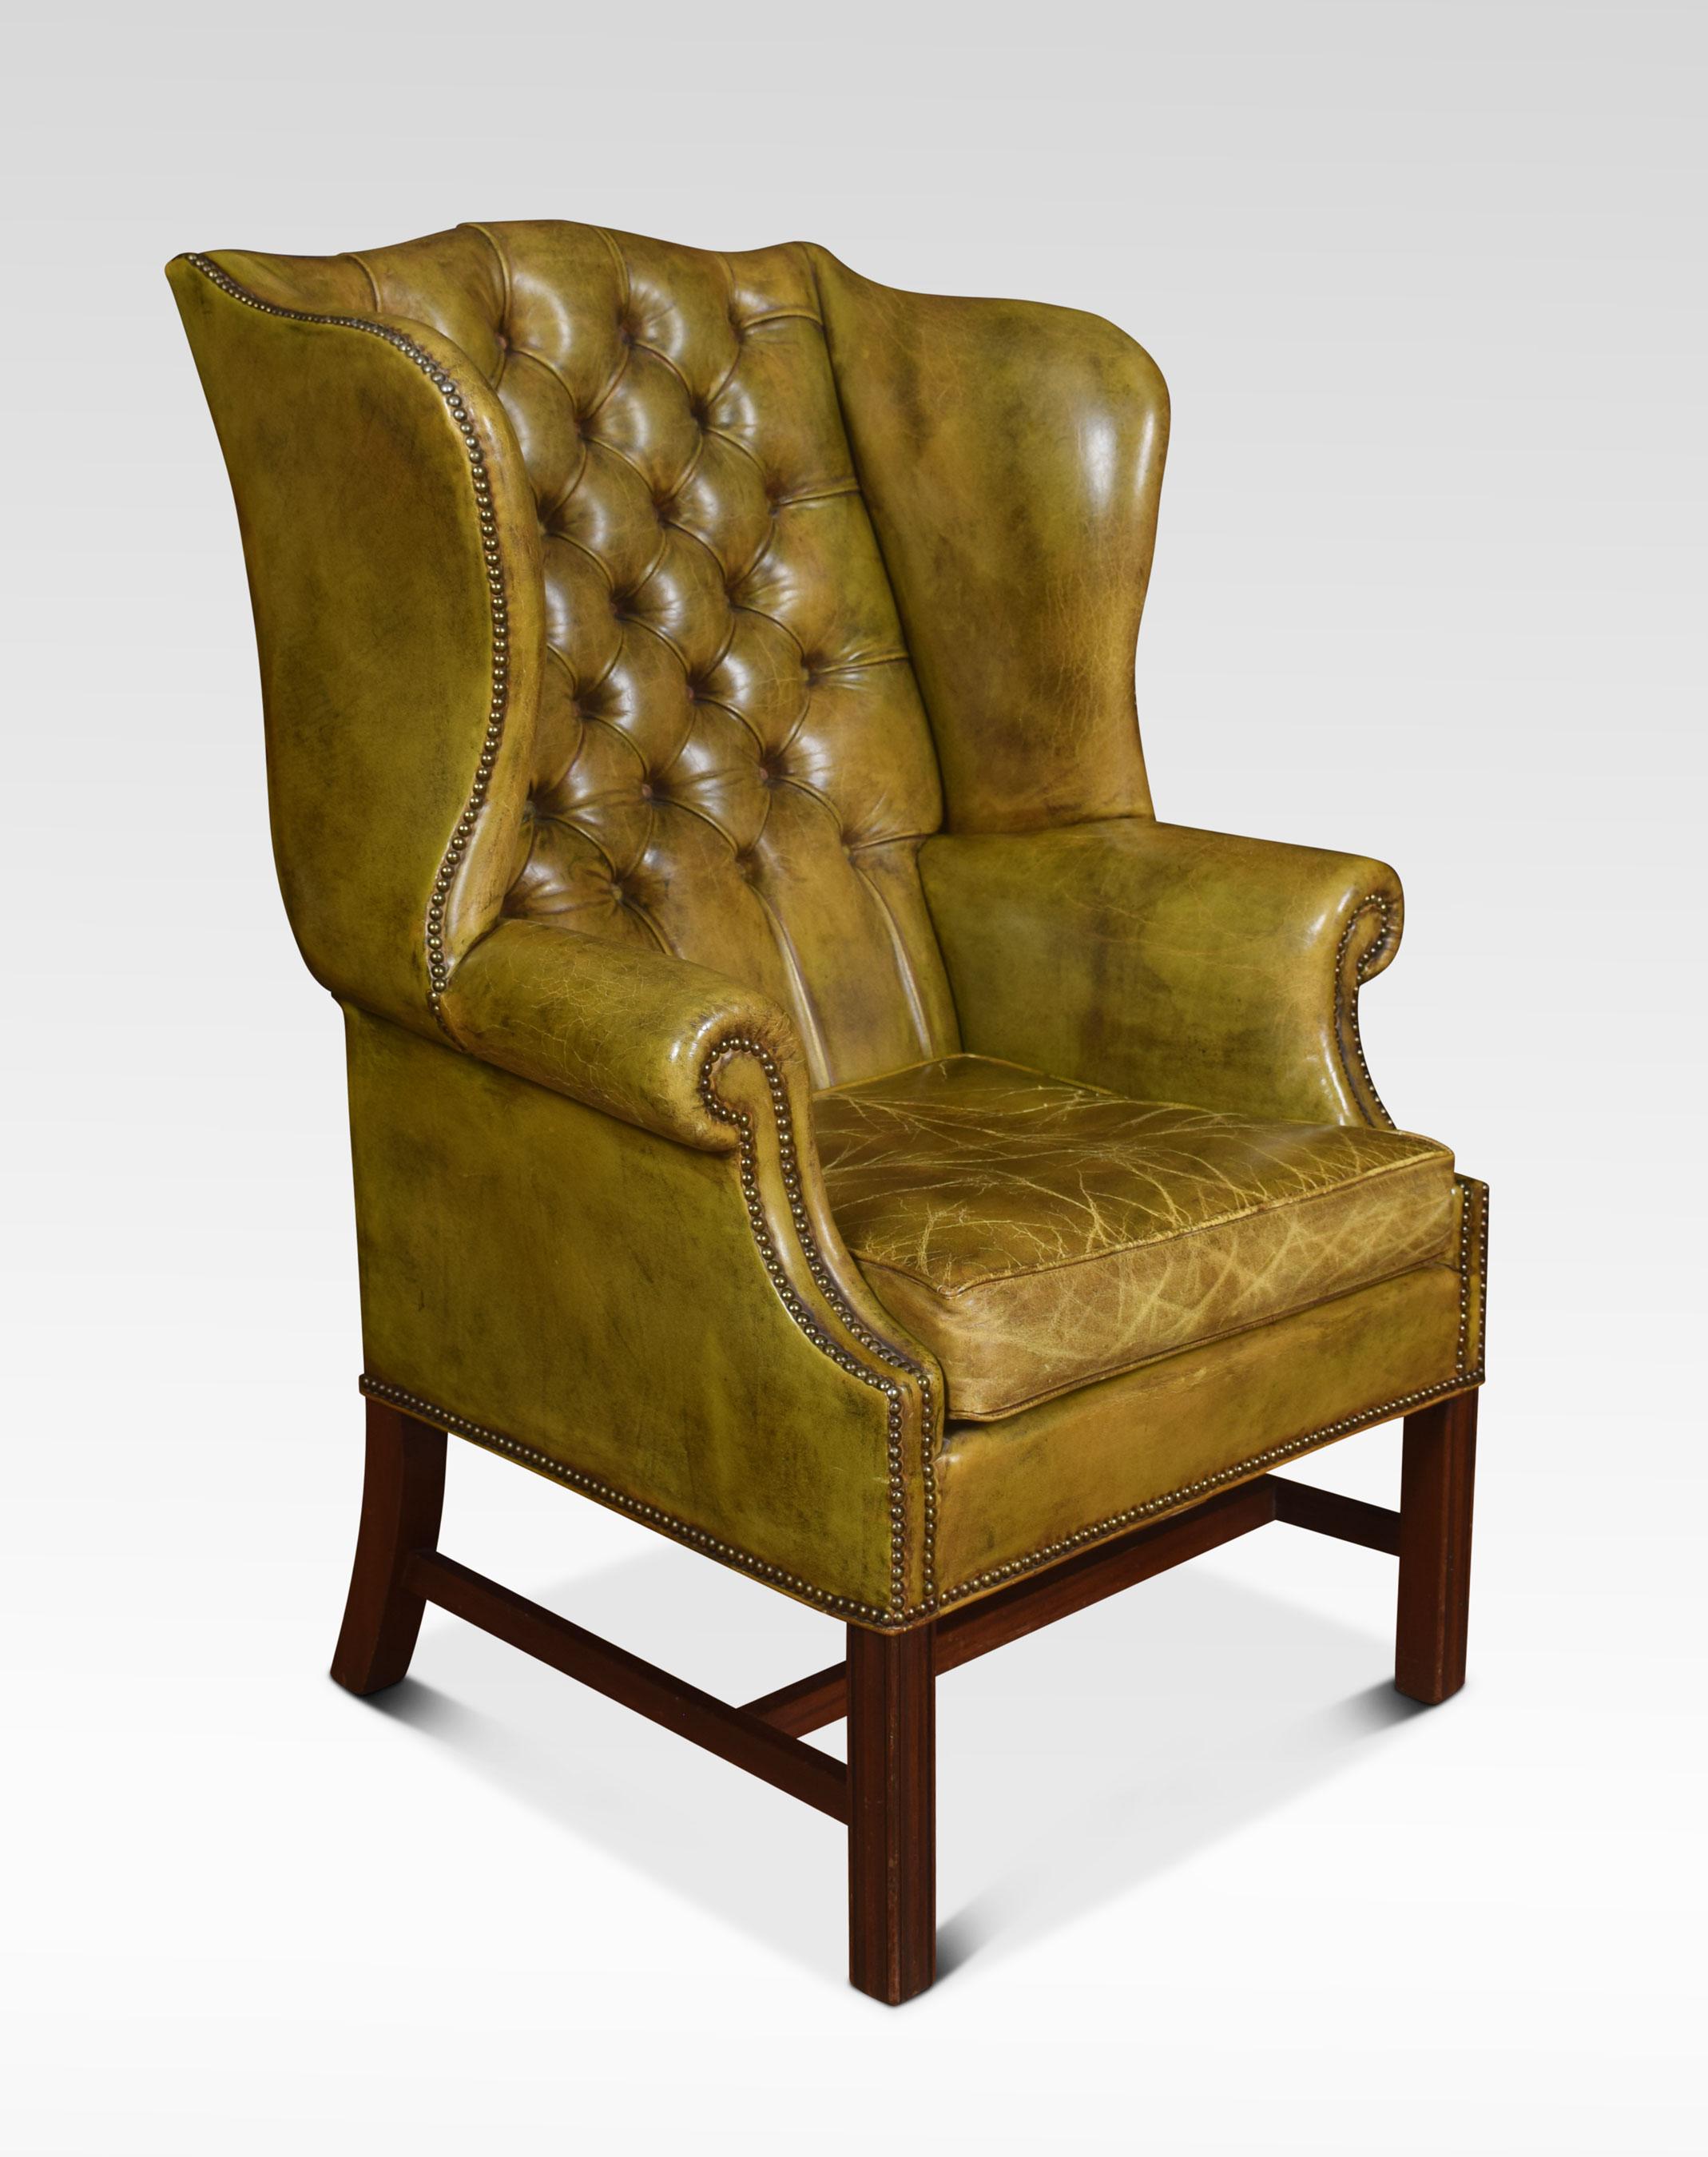 Mahogany framed wing armchair of generous proportions, the arched top above deep buttoned back, upholstered arms and seat in green leather, raised up on square supports united by a stretcher.
Dimensions
Height 47 inches height to seat 20